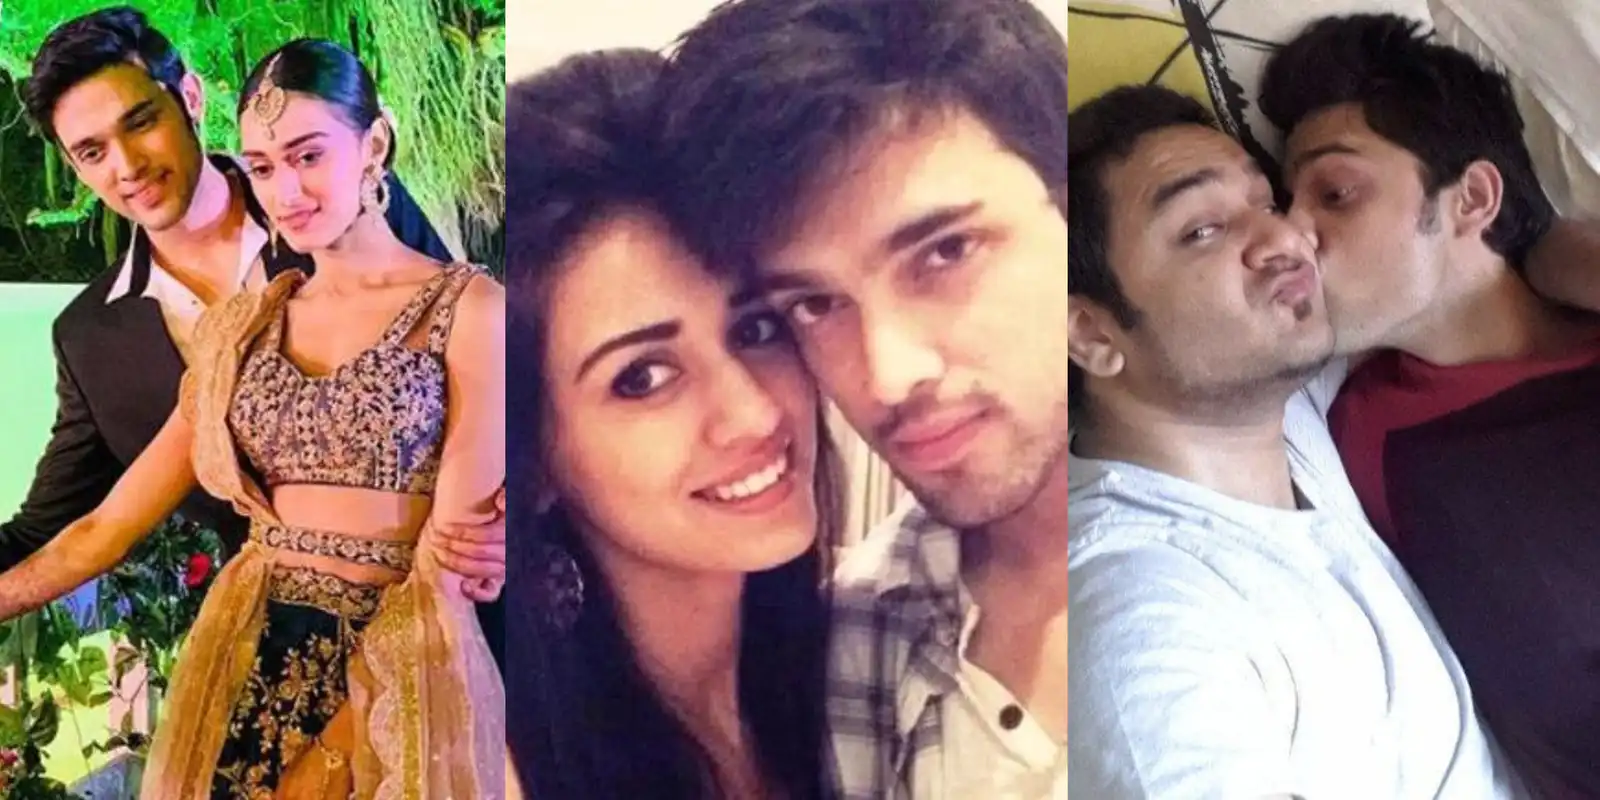 In Pictures: All The Alleged Affairs Of TV's Anurag Basu, Parth Samthaan!